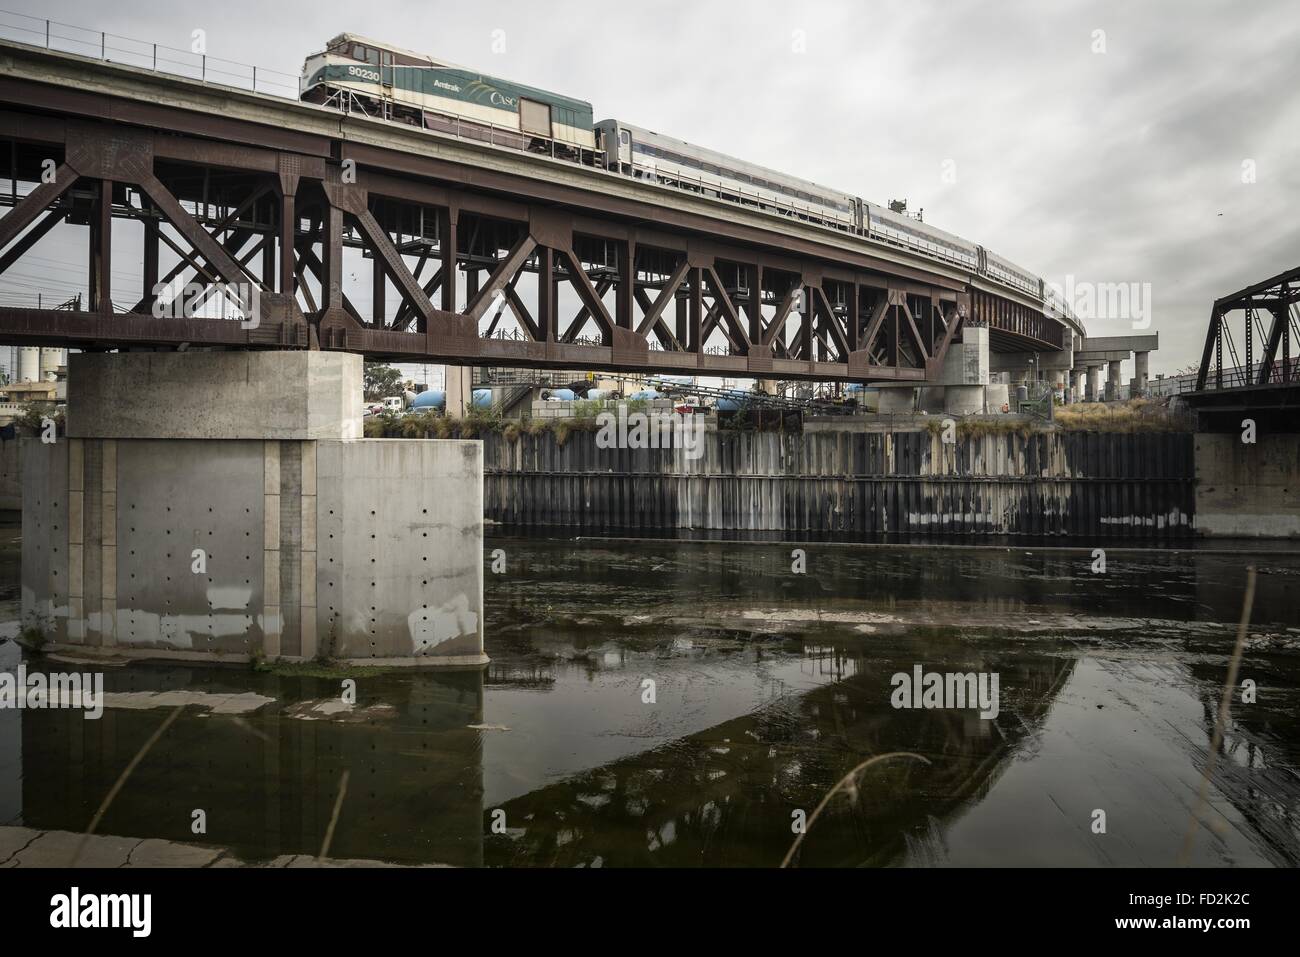 Dec. 4, 2015 - Los Angeles, California, U.S - A steel railroad bridge spans the LA River south of Main Street and carries light rail traffic out of Union Station. (Credit Image: © Fred Hoerr via ZUMA Wire) Stock Photo